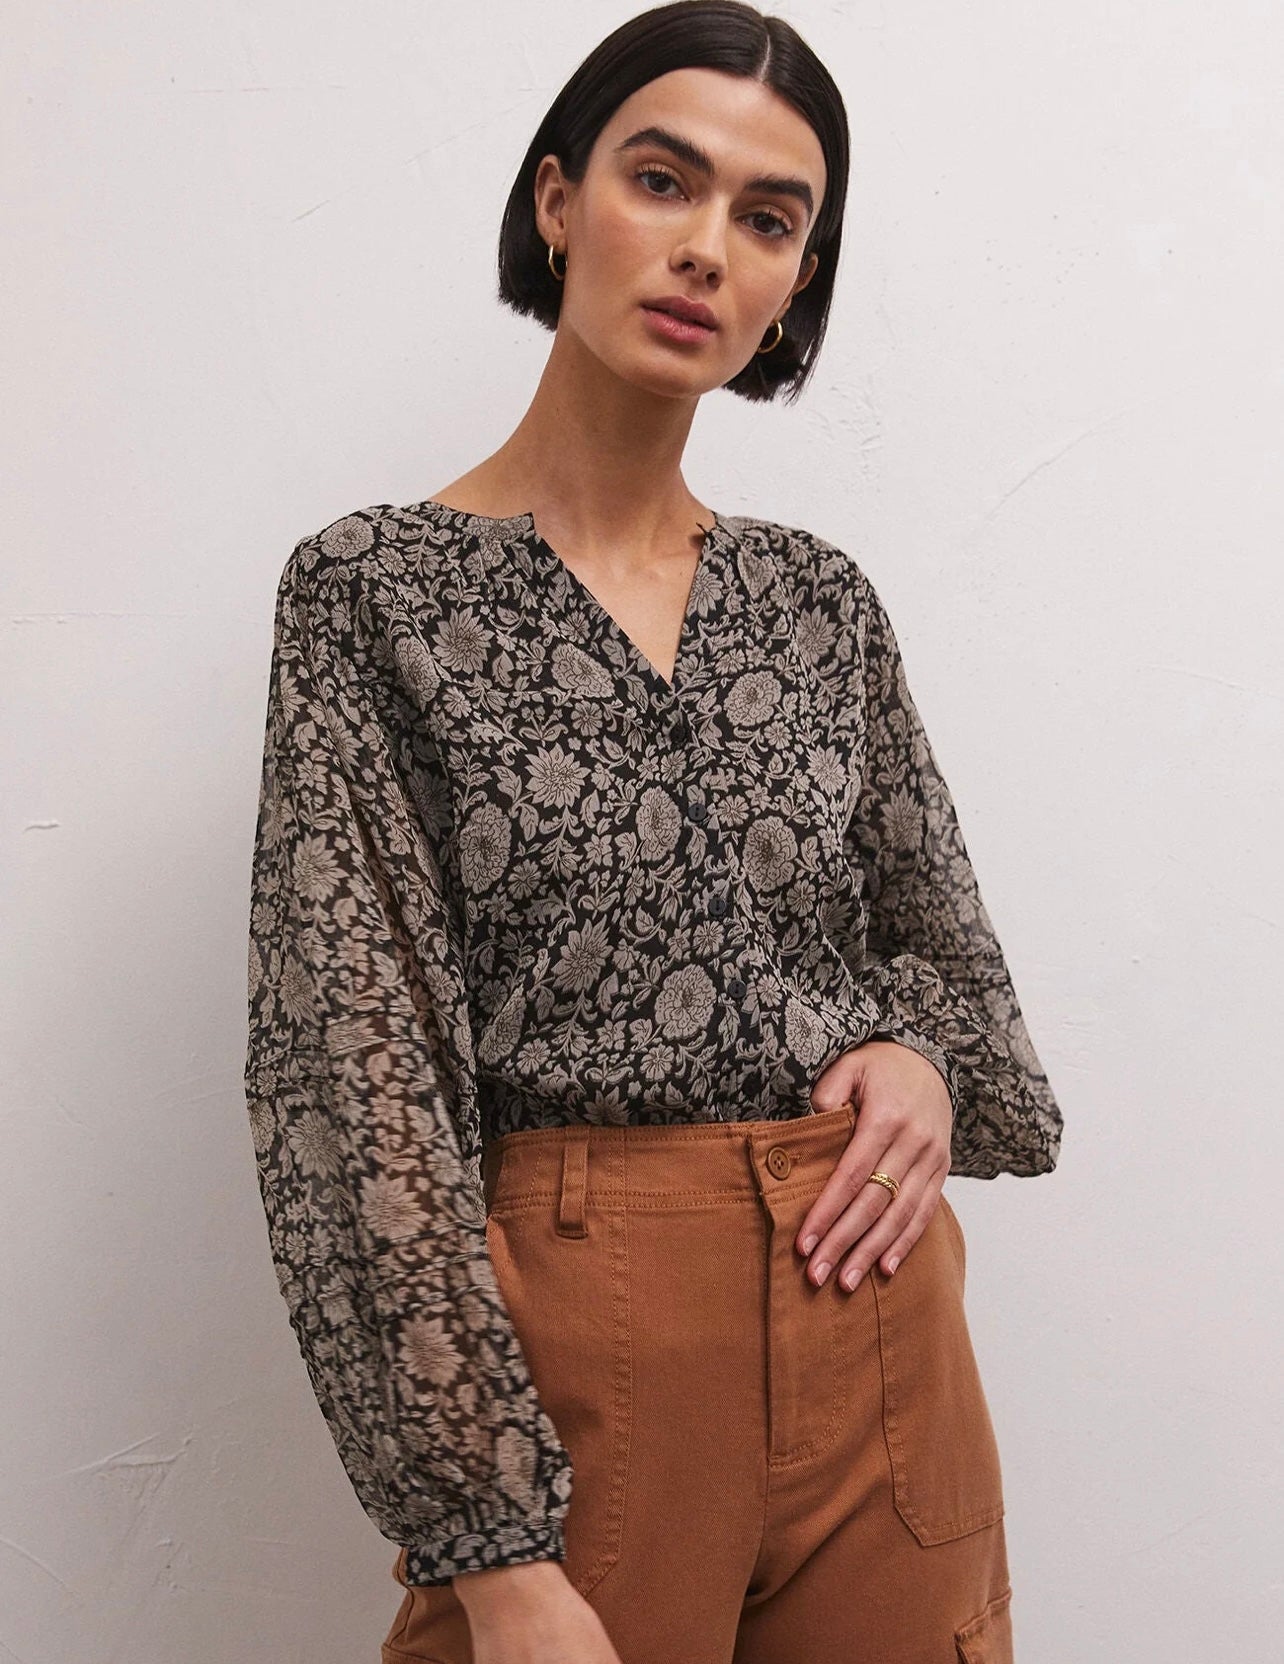 Blk and Cream Floral Blouse